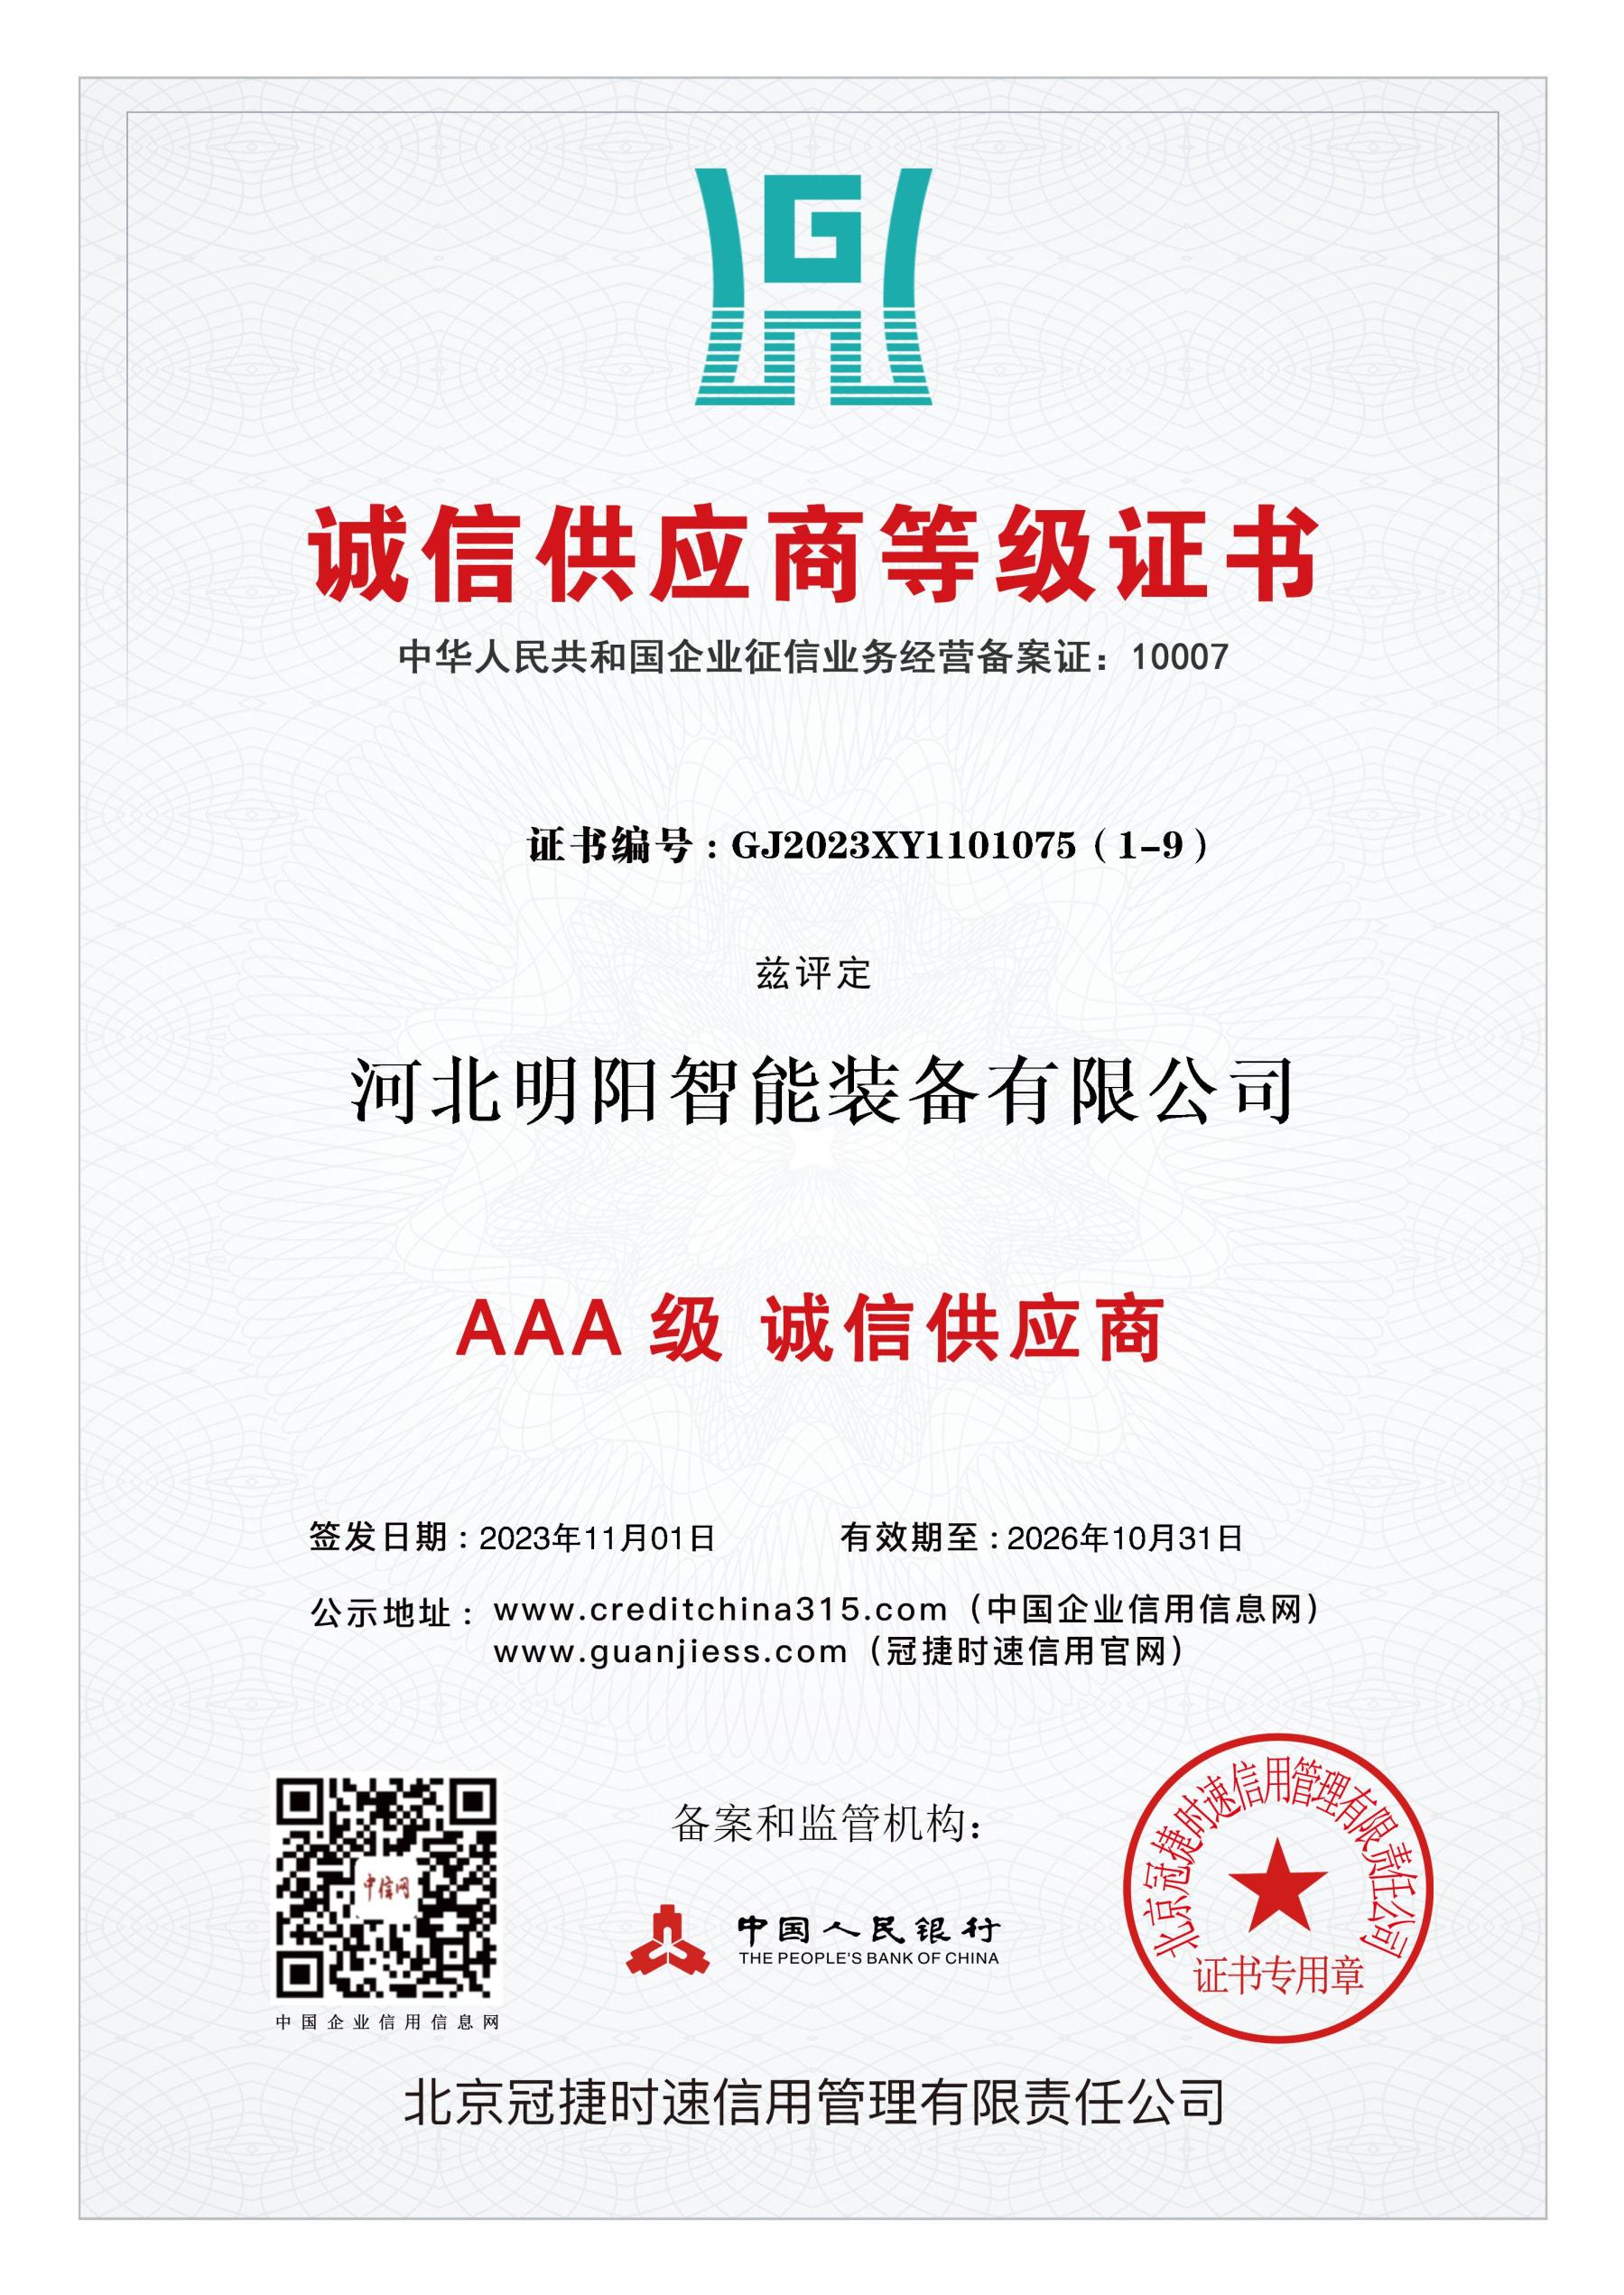 Warmly celebrate our company was rated as an honest supplier